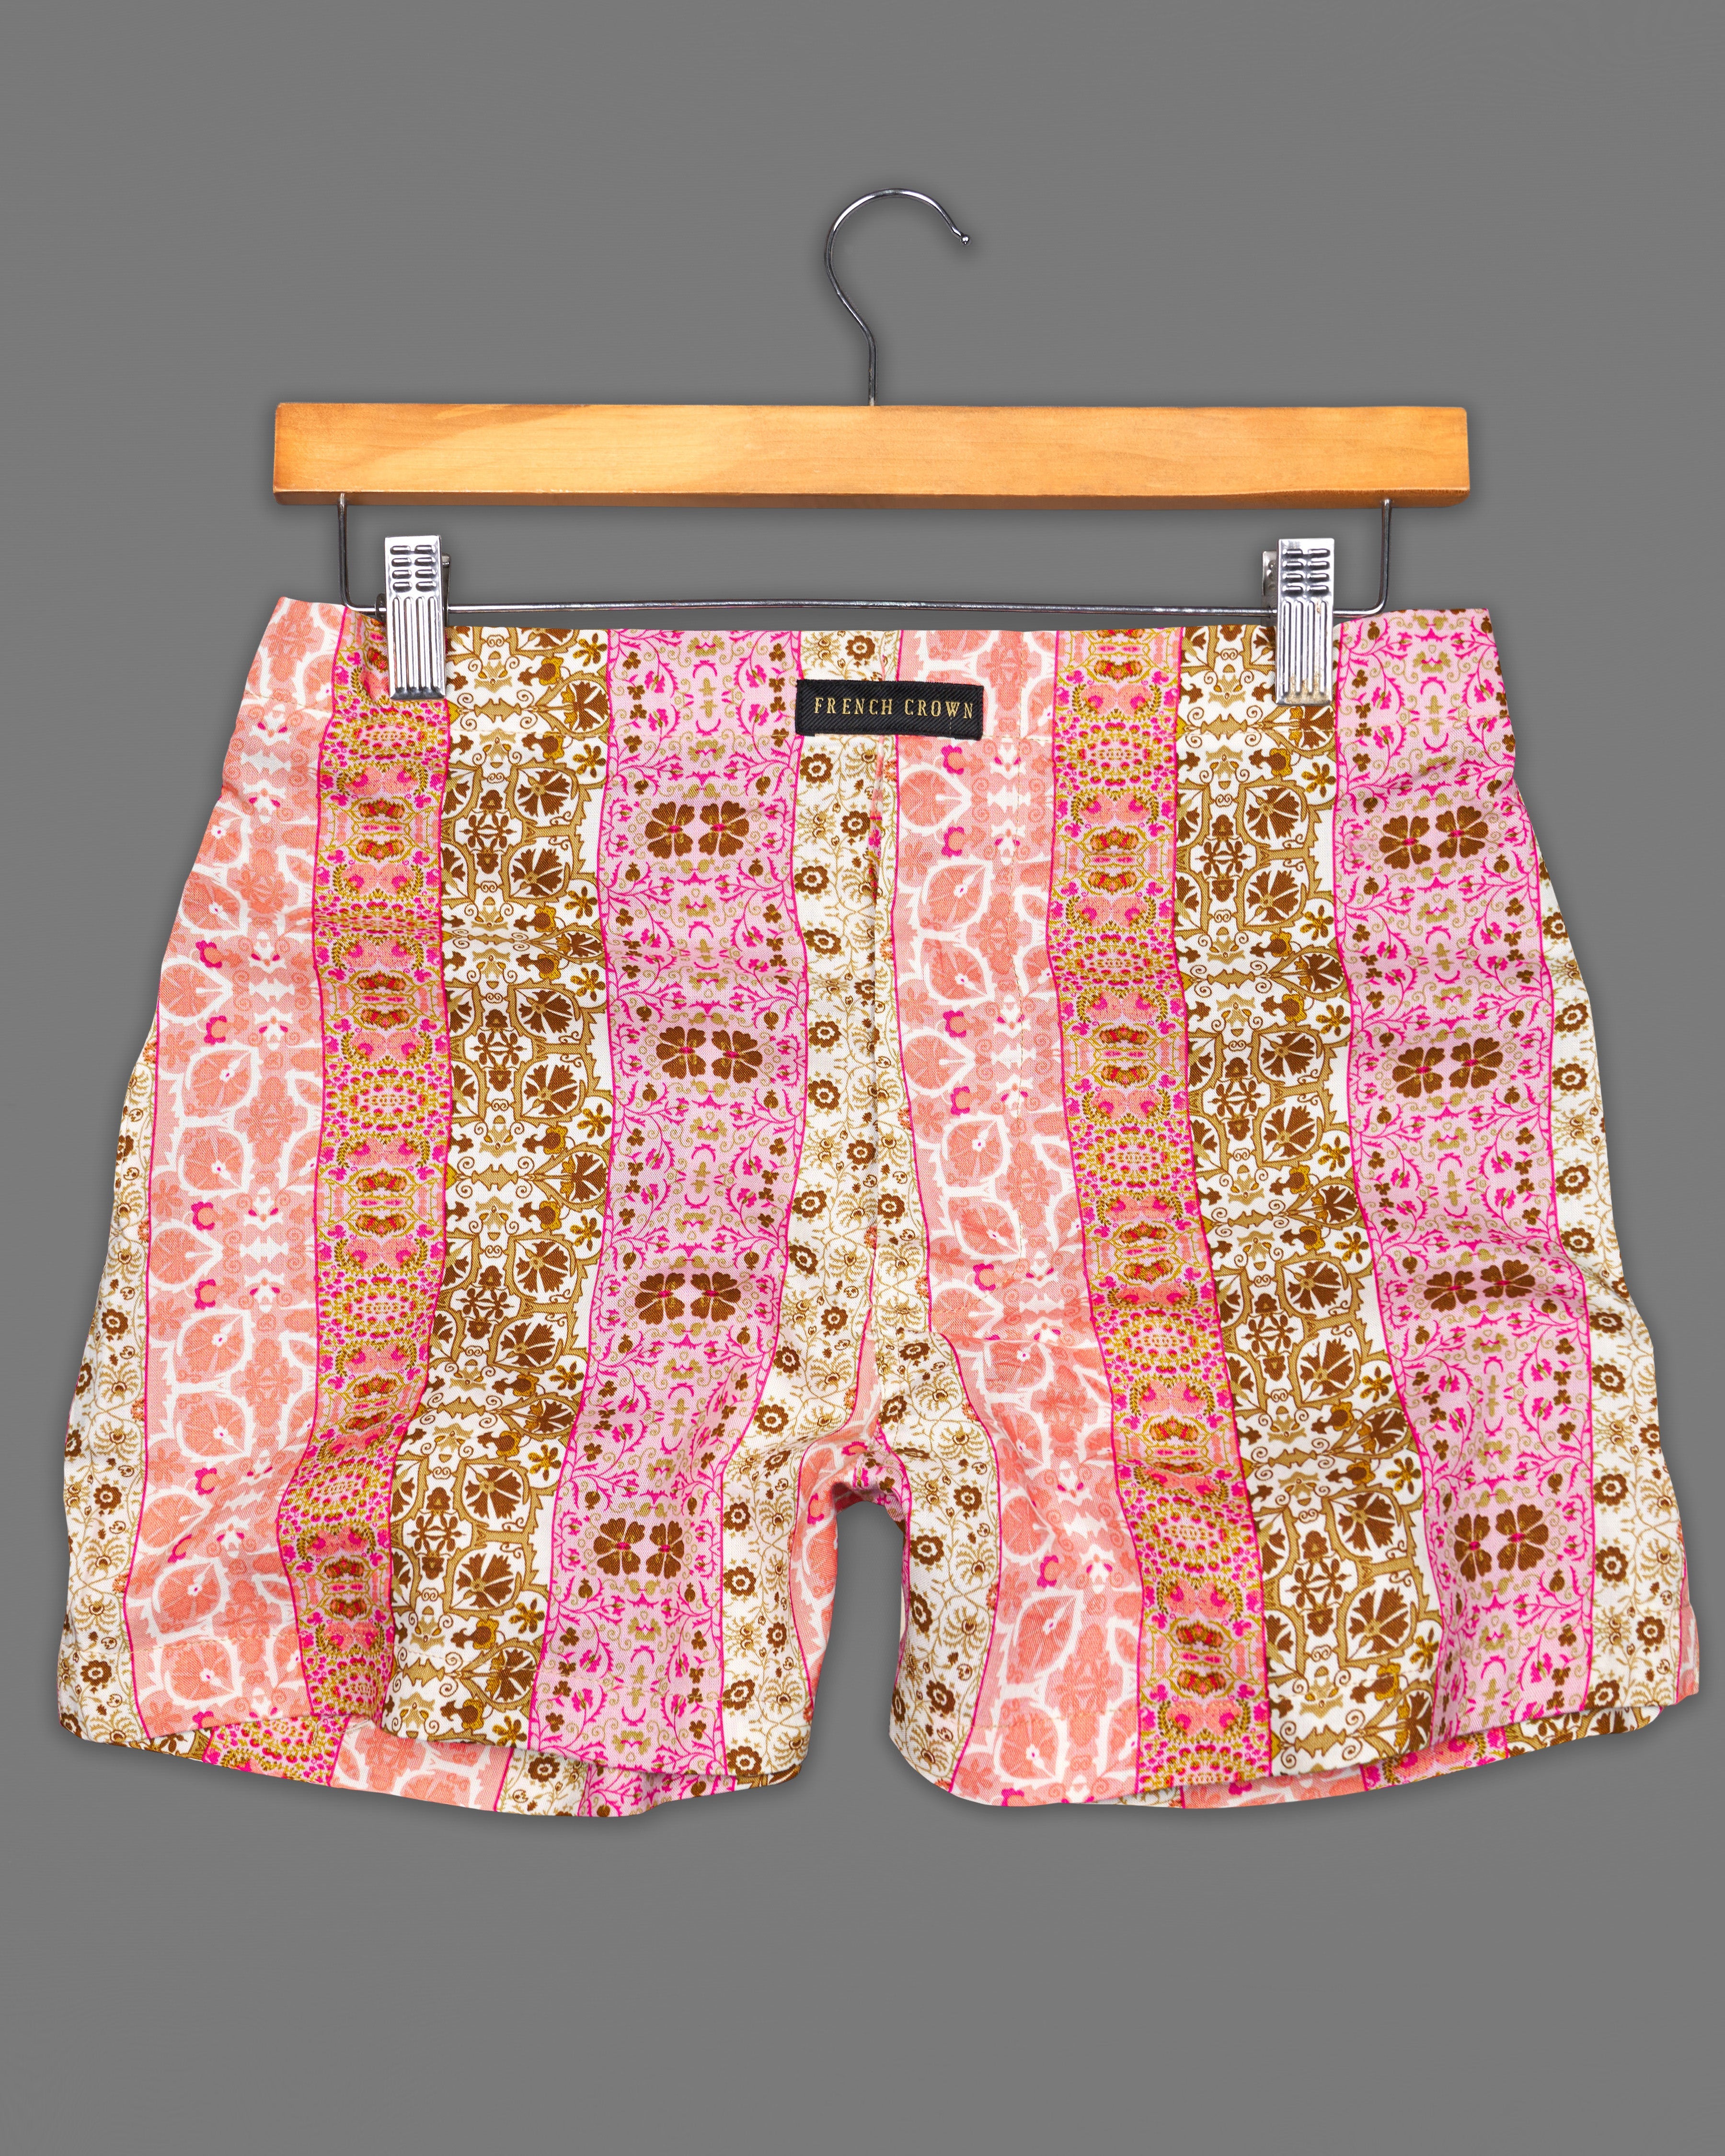 Twilight Brown with Persian Pink Printed Premium Tencel Boxers BX445-28, BX445-30, BX445-32, BX445-34, BX445-36, BX445-38, BX445-40, BX445-42, BX445-44